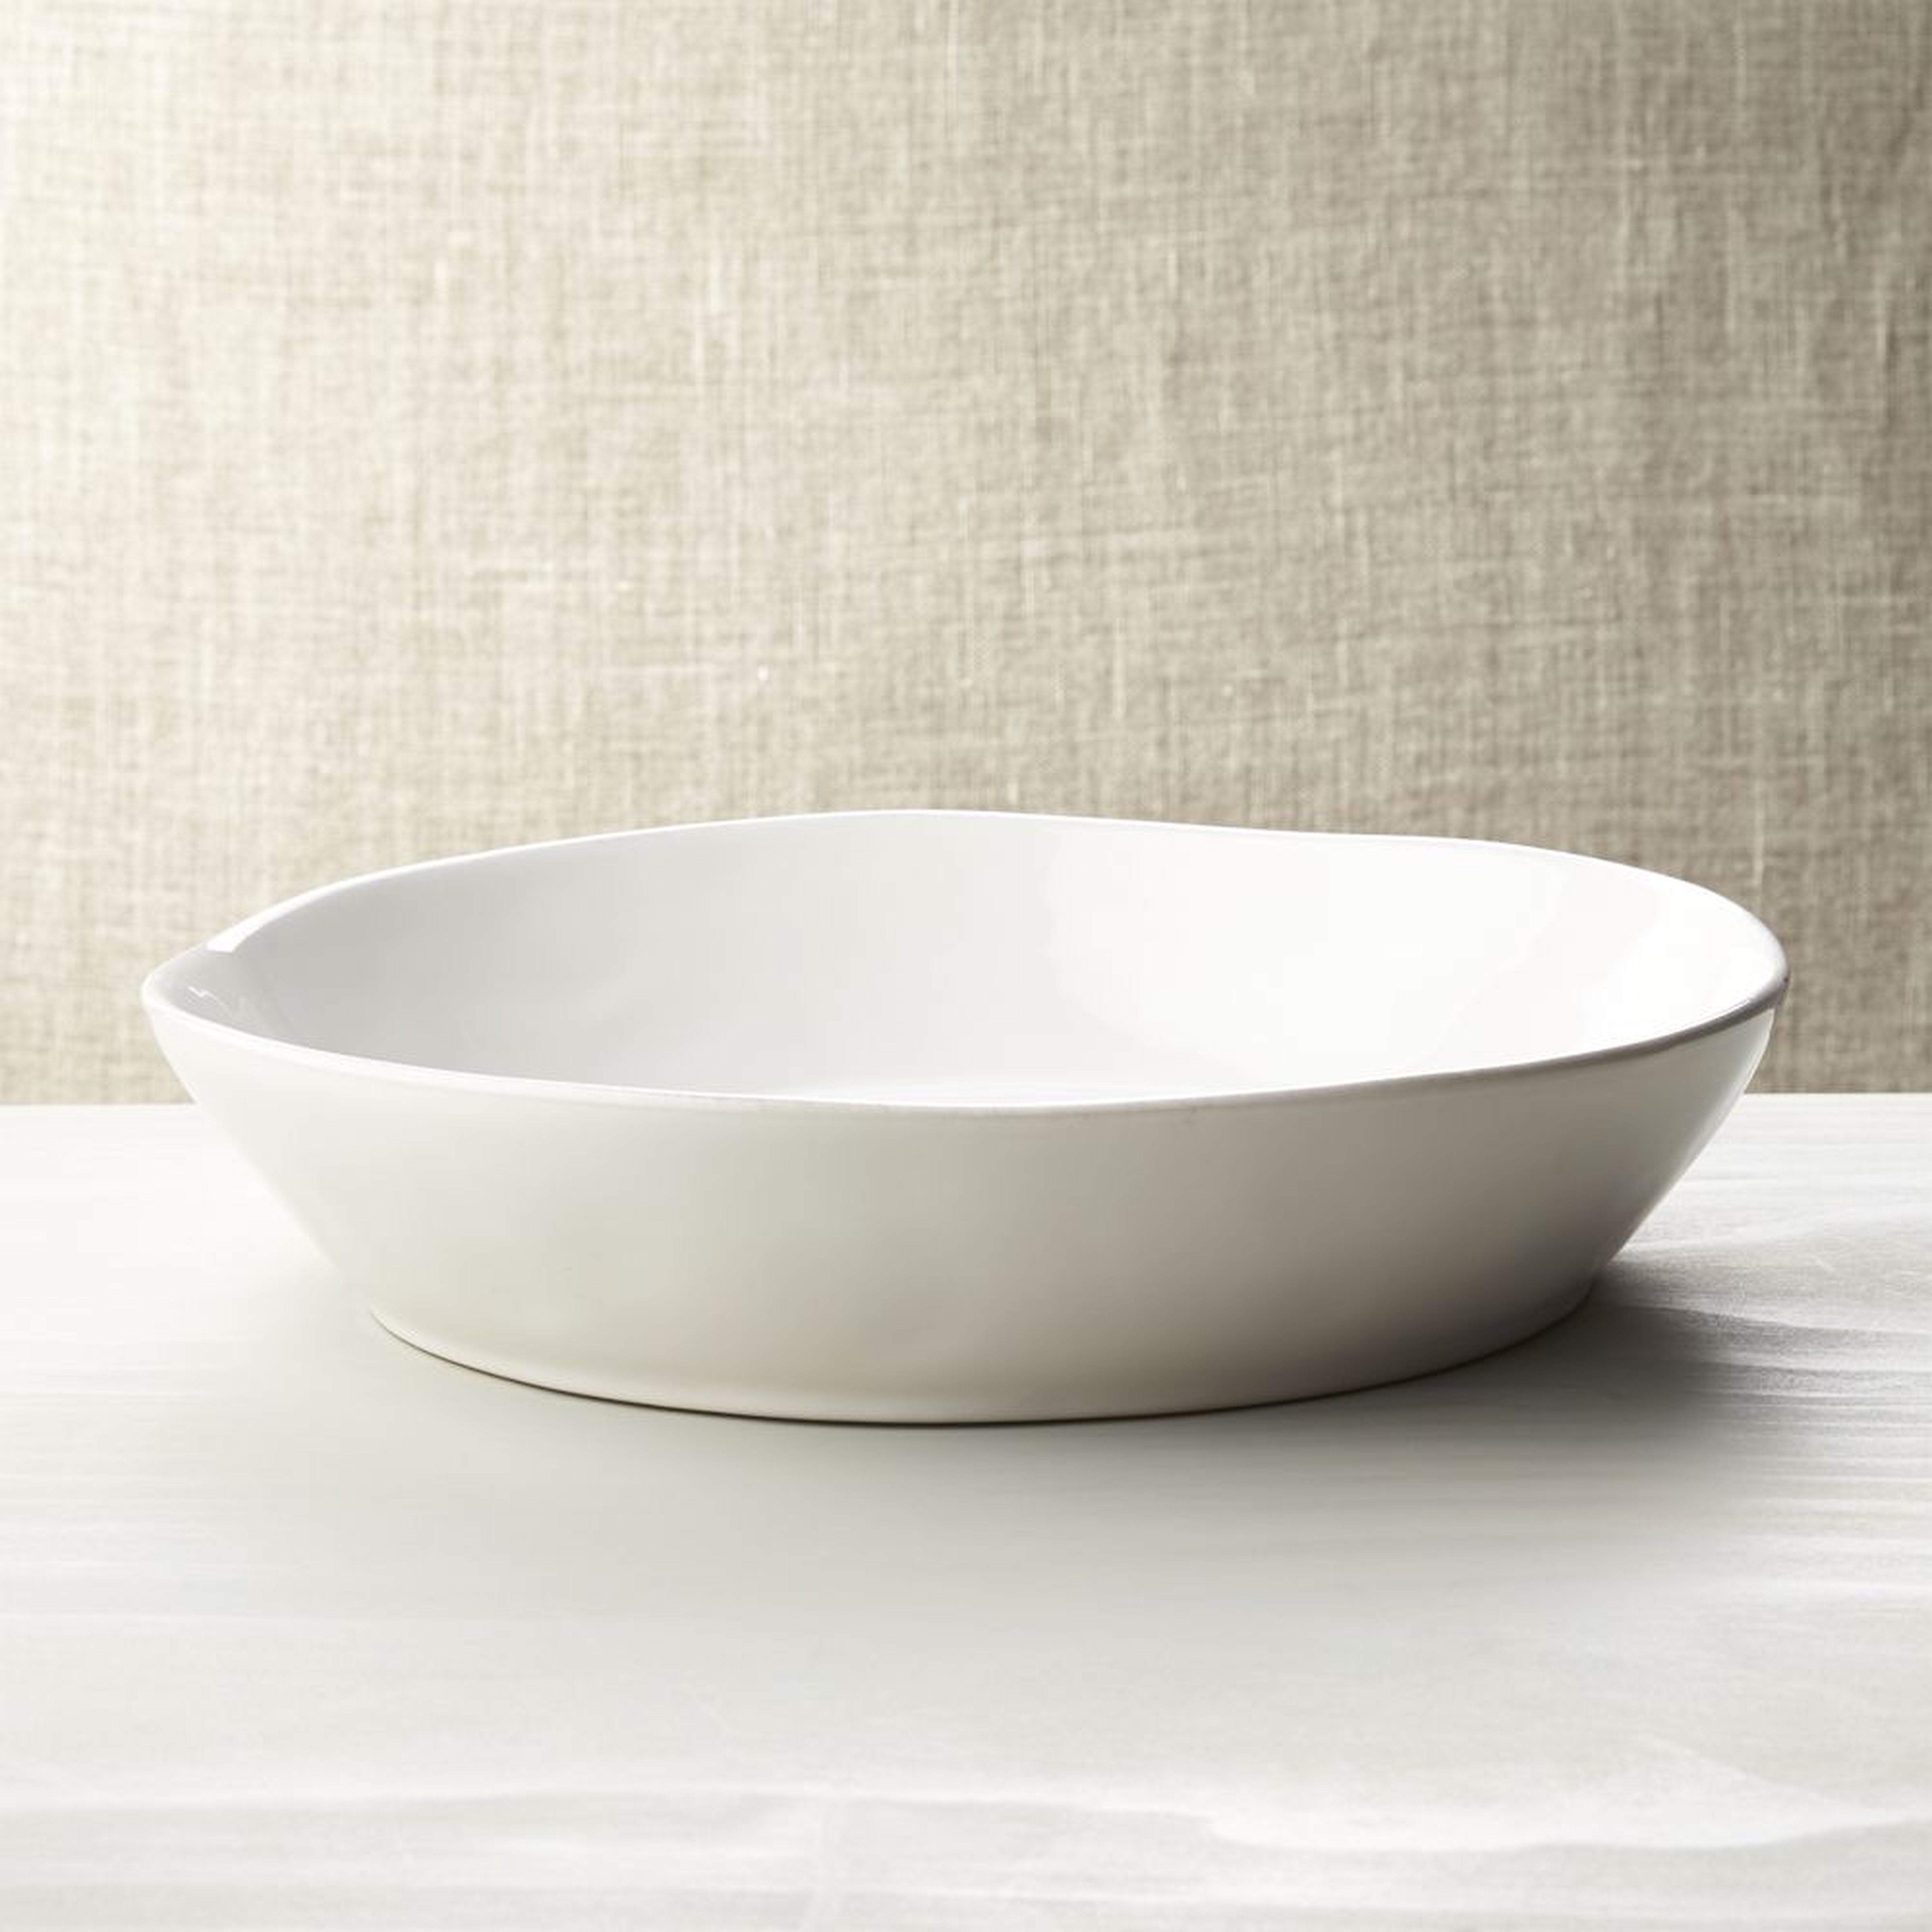 Marin Centerpiece Bowl, White, 13.5" - Crate and Barrel